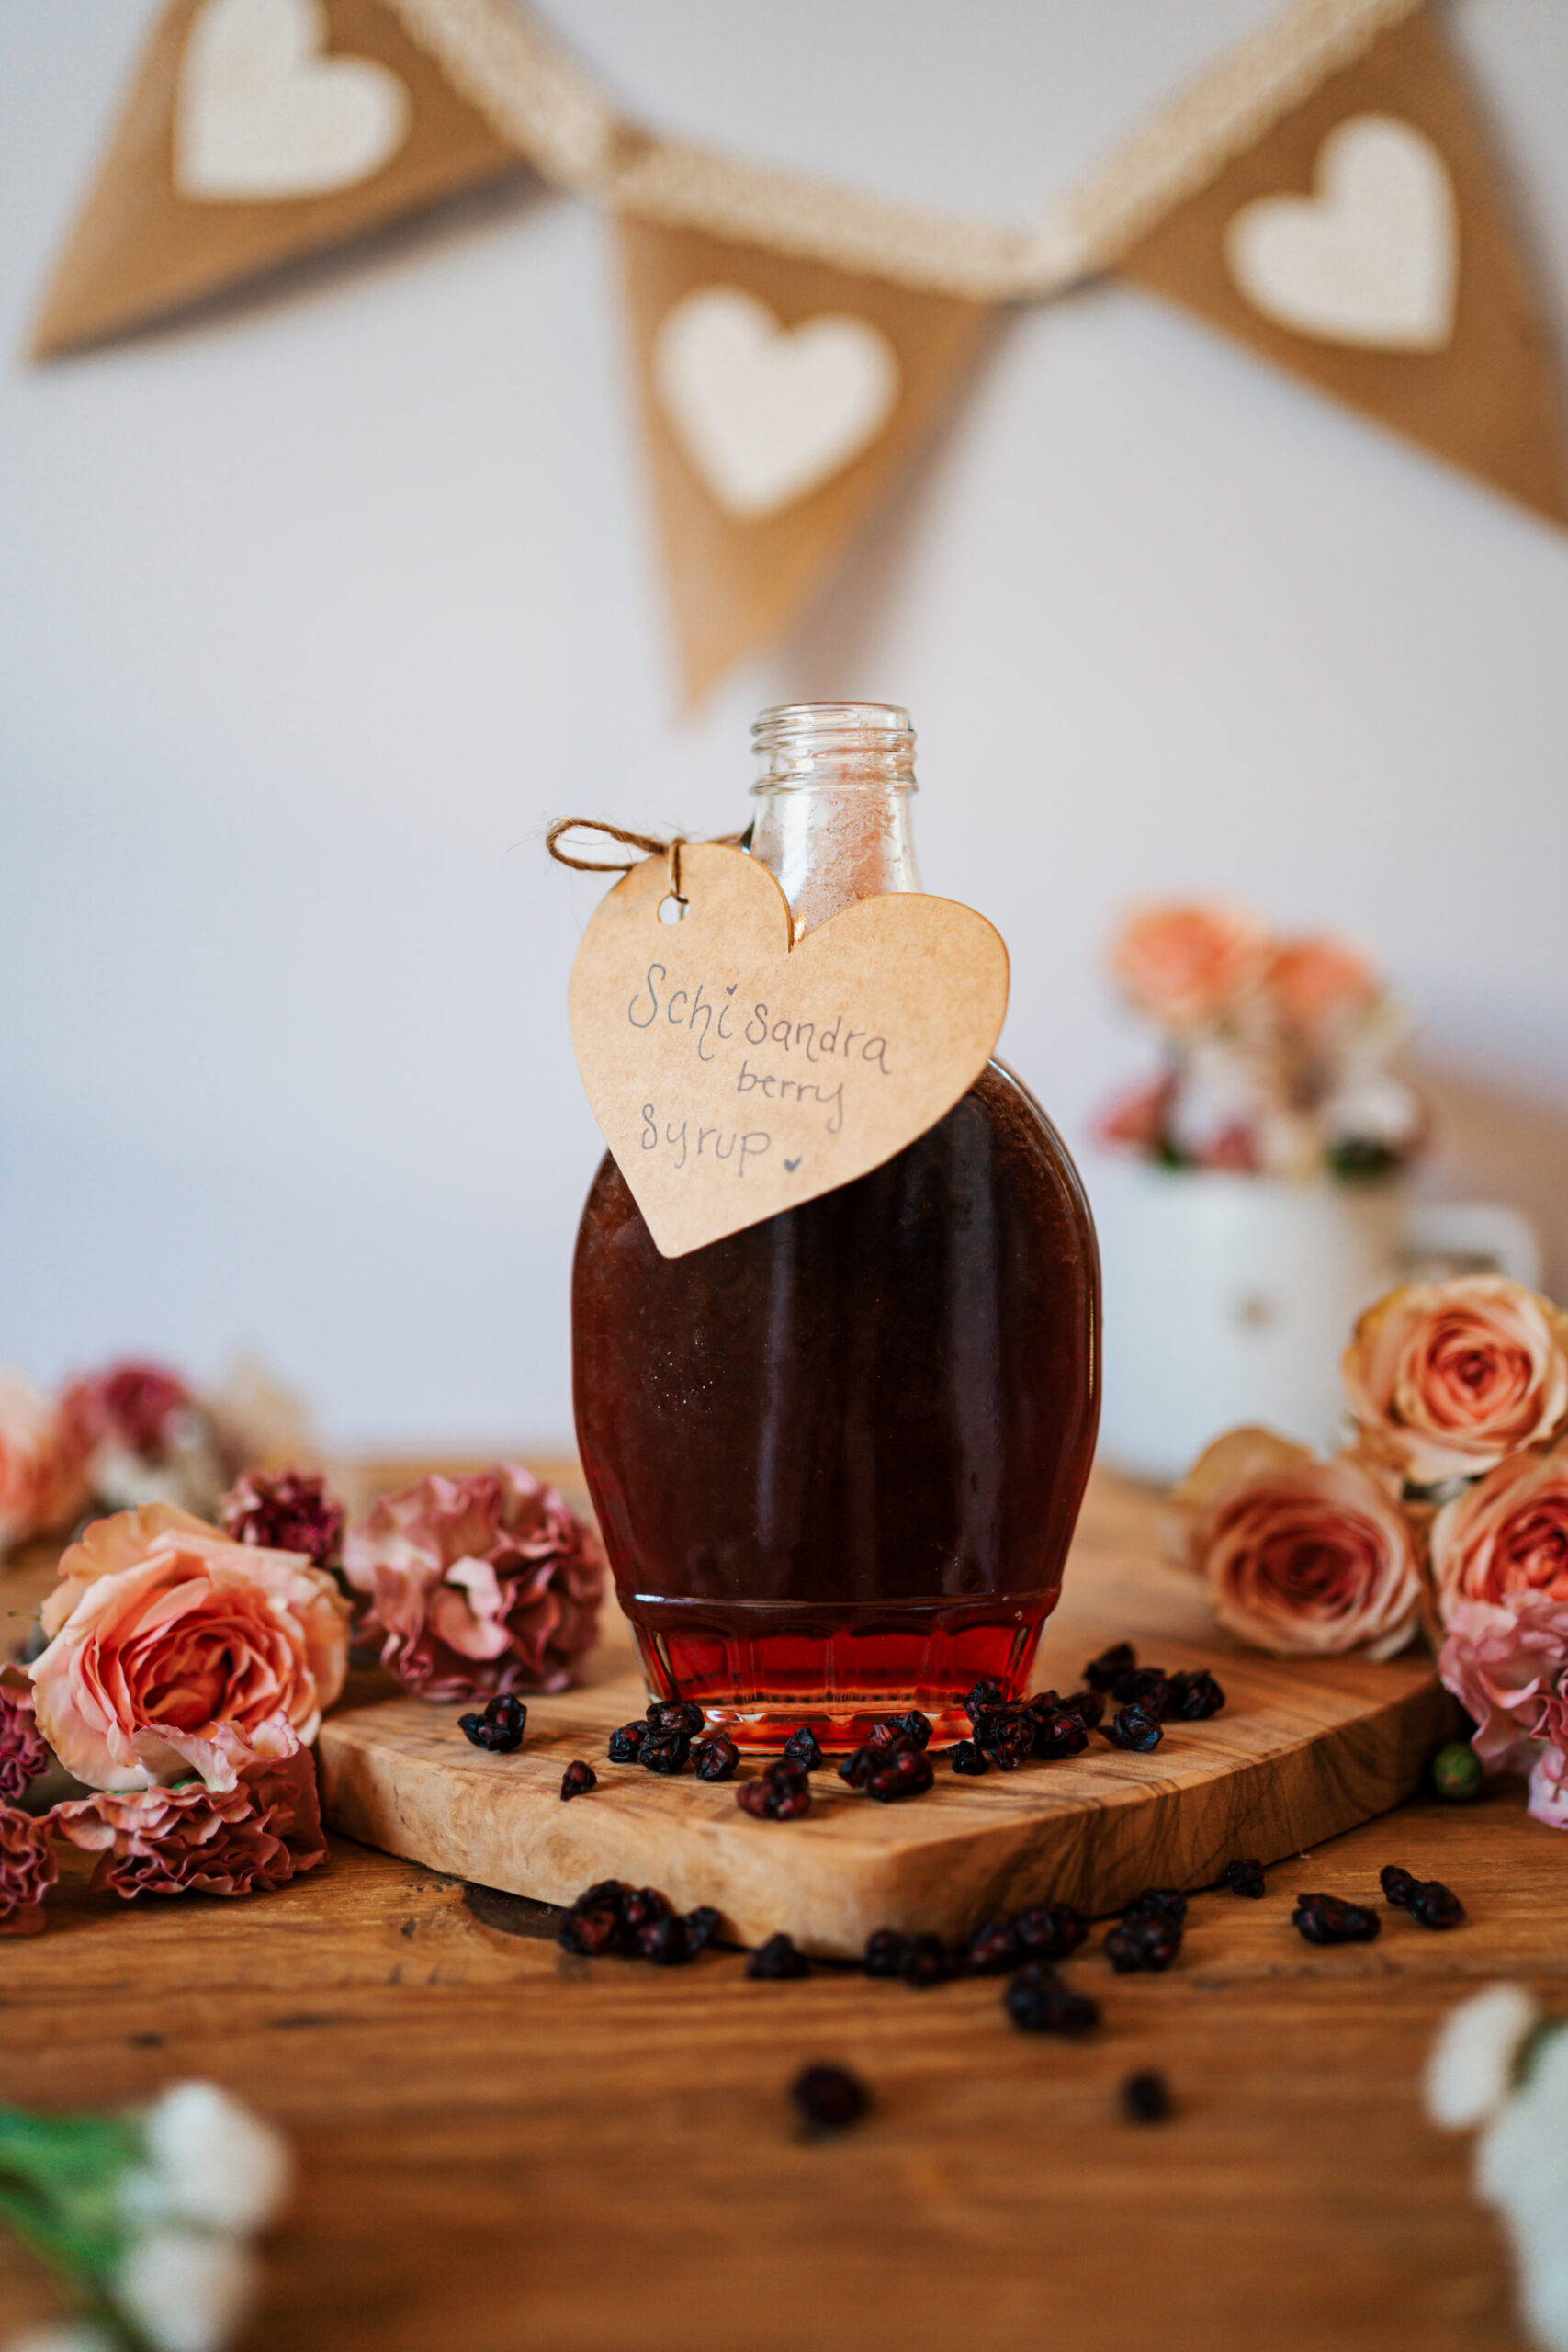 schisandra berry syrup in a bottle